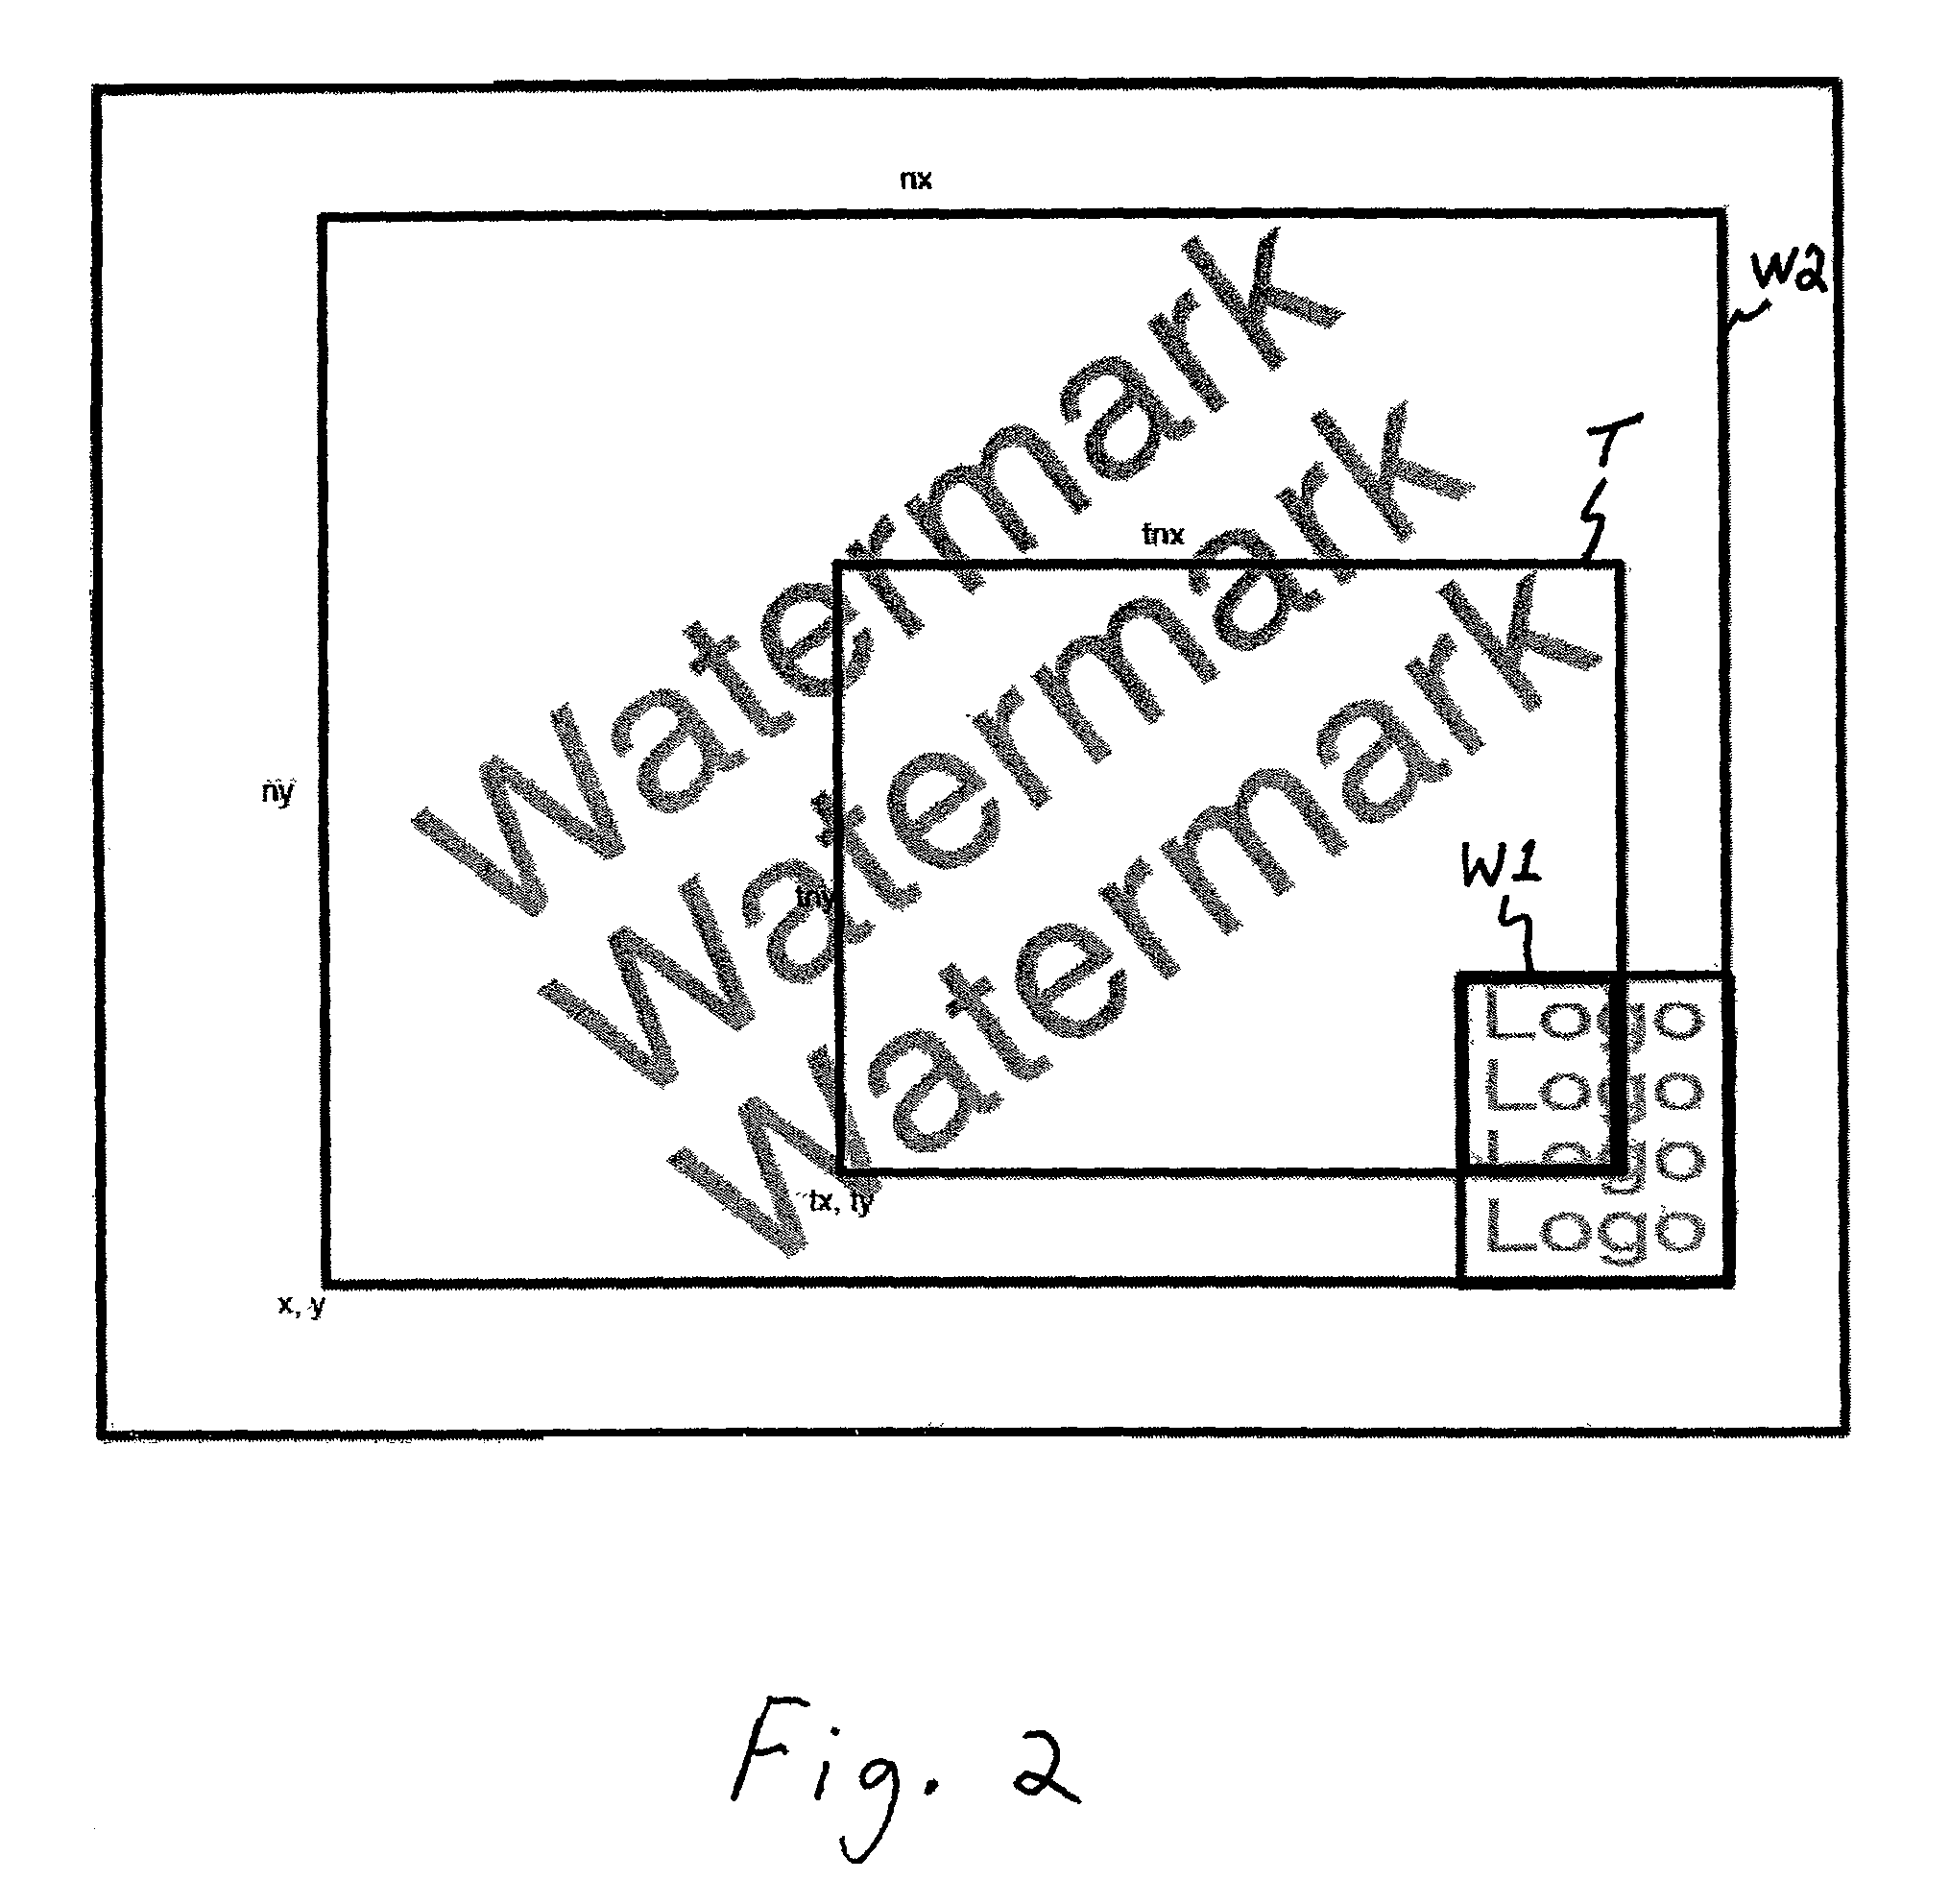 Method for applying a digital watermark to an output image from a computer program